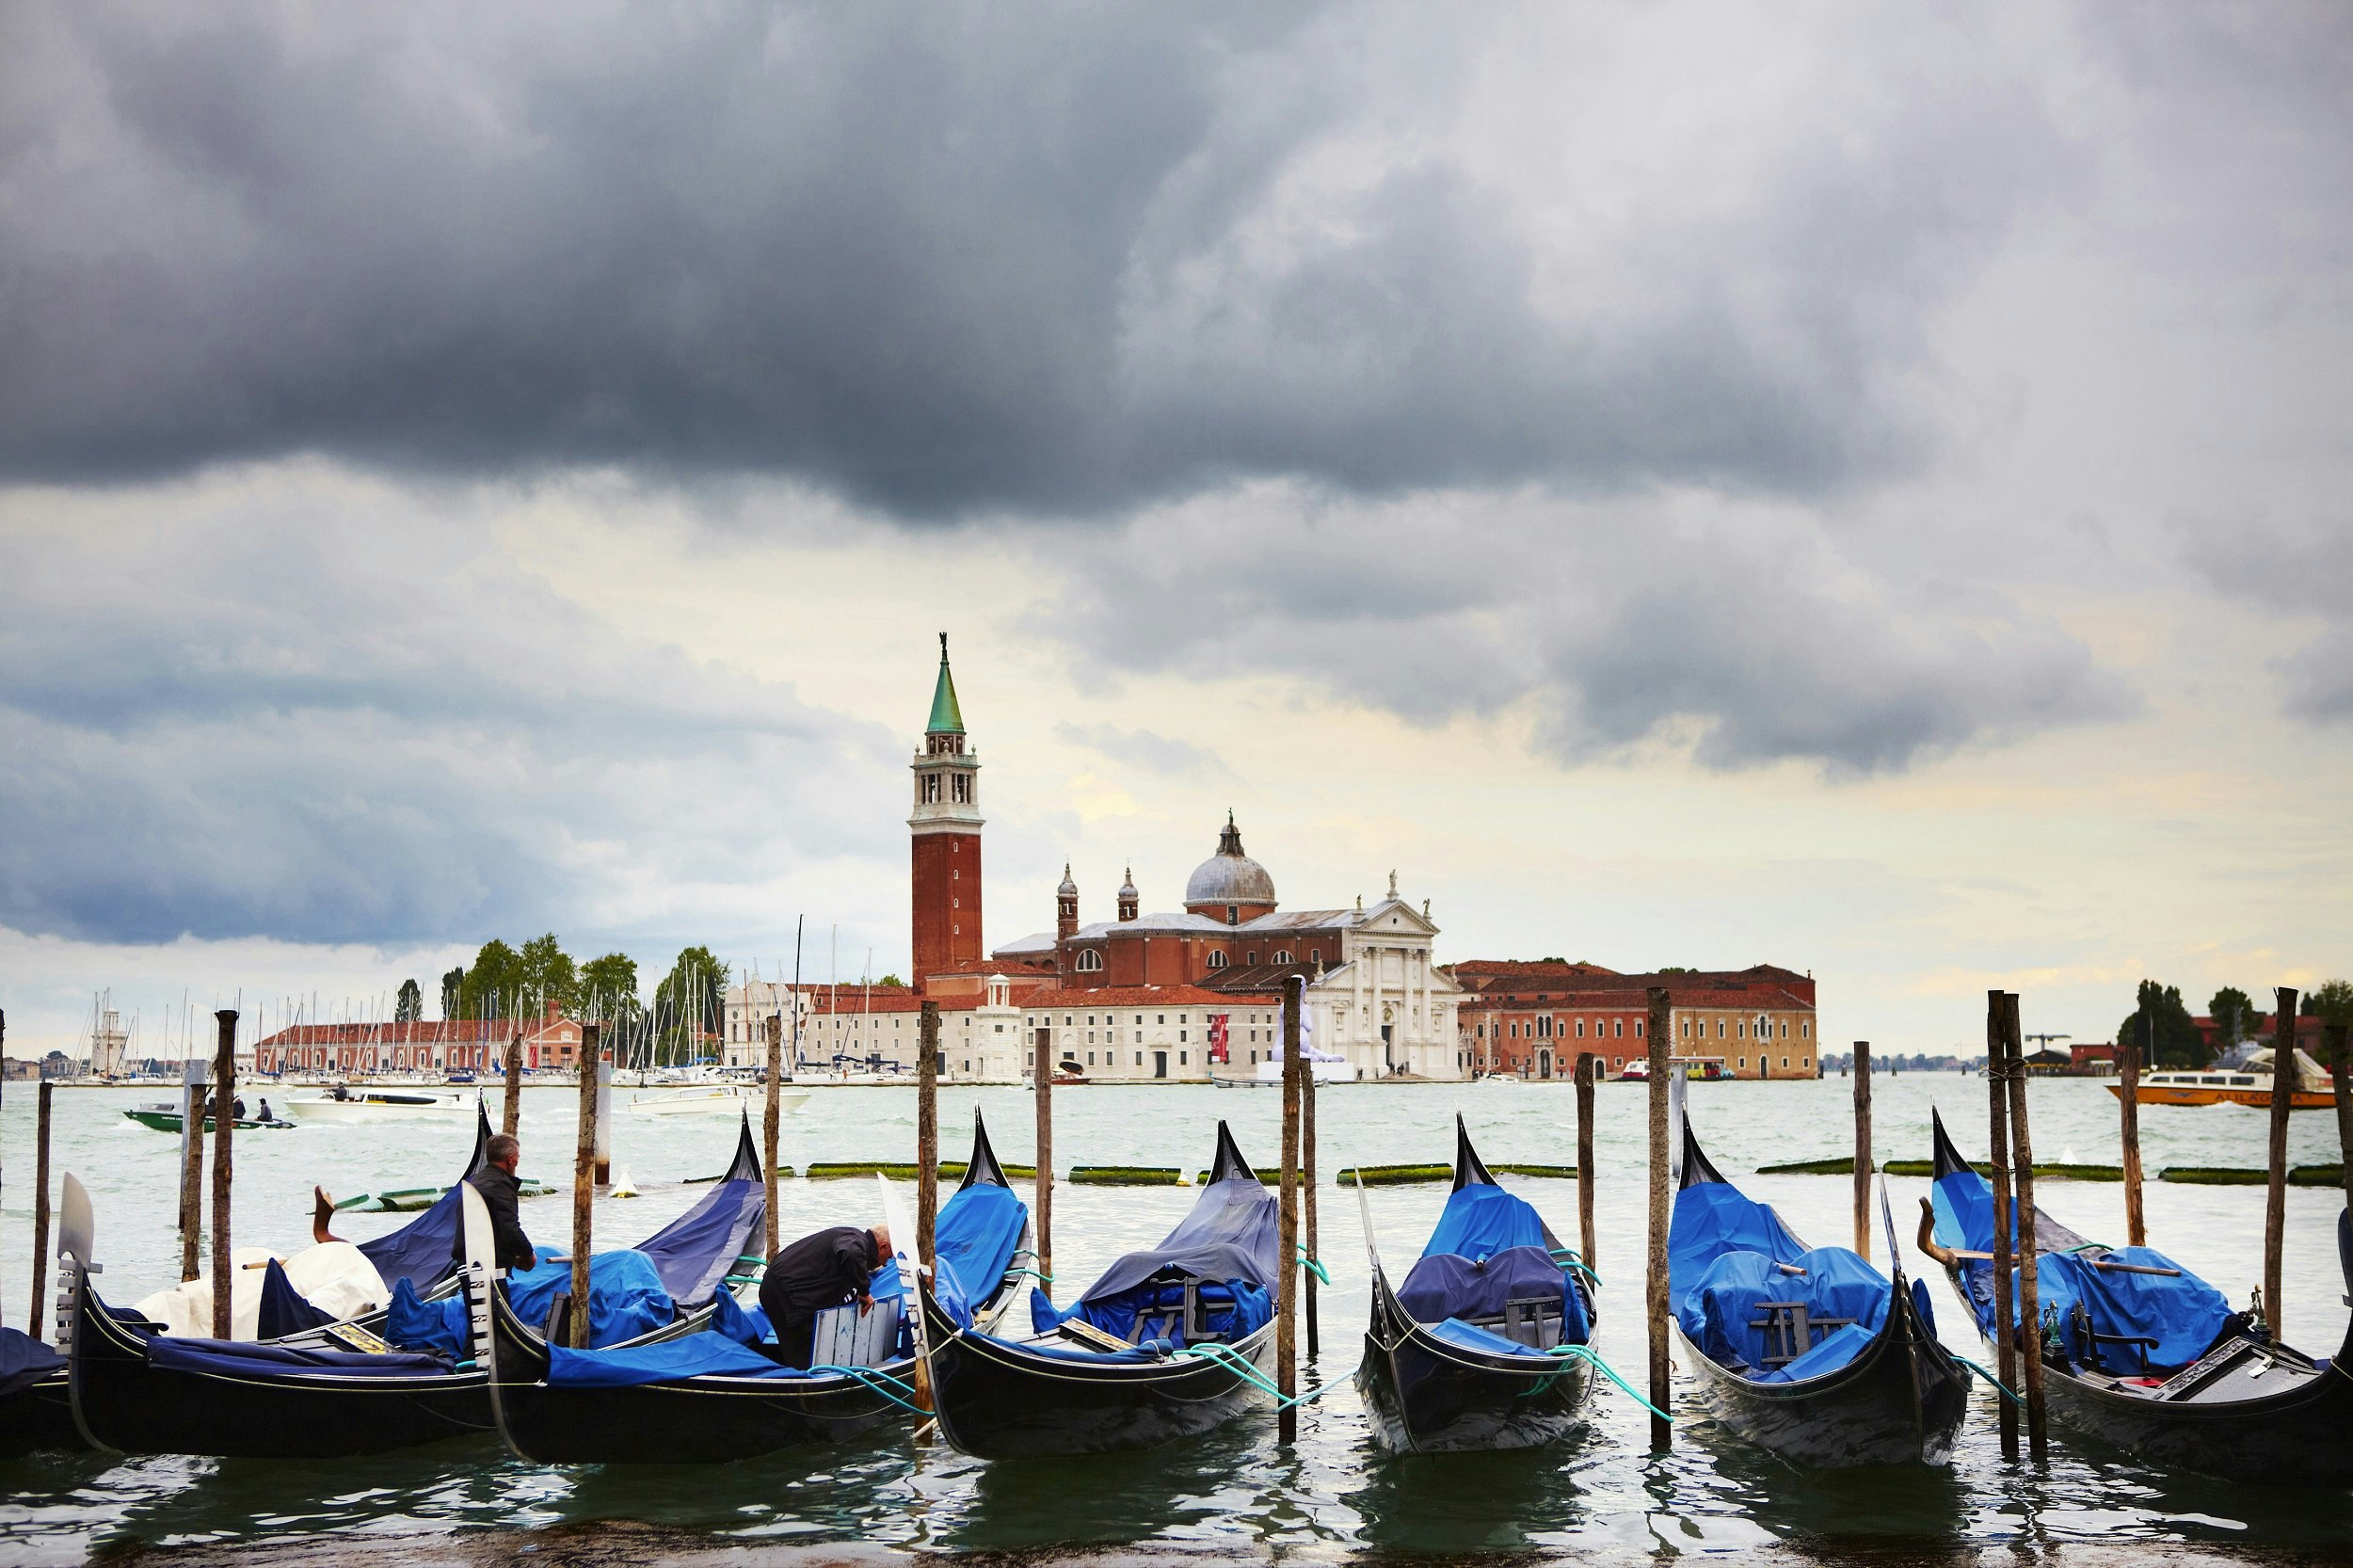 Seven gondolas with blue covers are tied to posts in the water. Across the basin is a red-brick church with a tall tower.